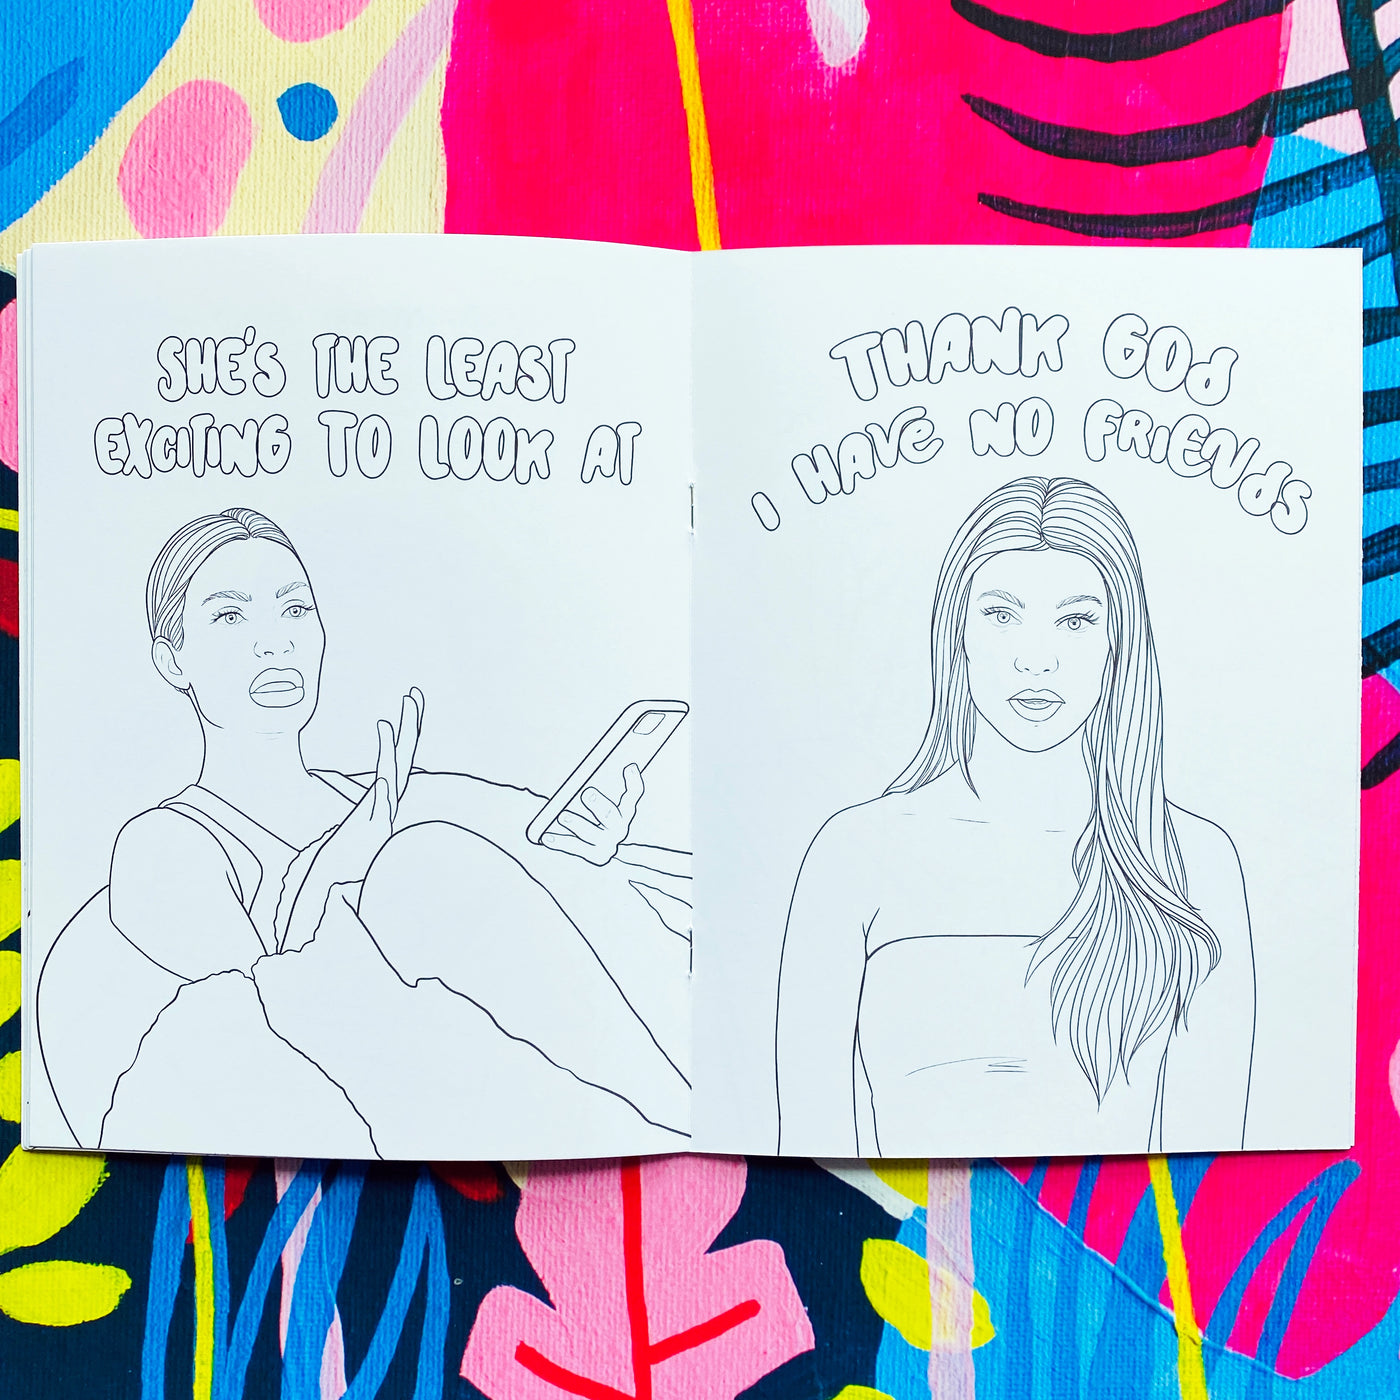 THE KARDASHIAN'S ADULT COLORING BOOK